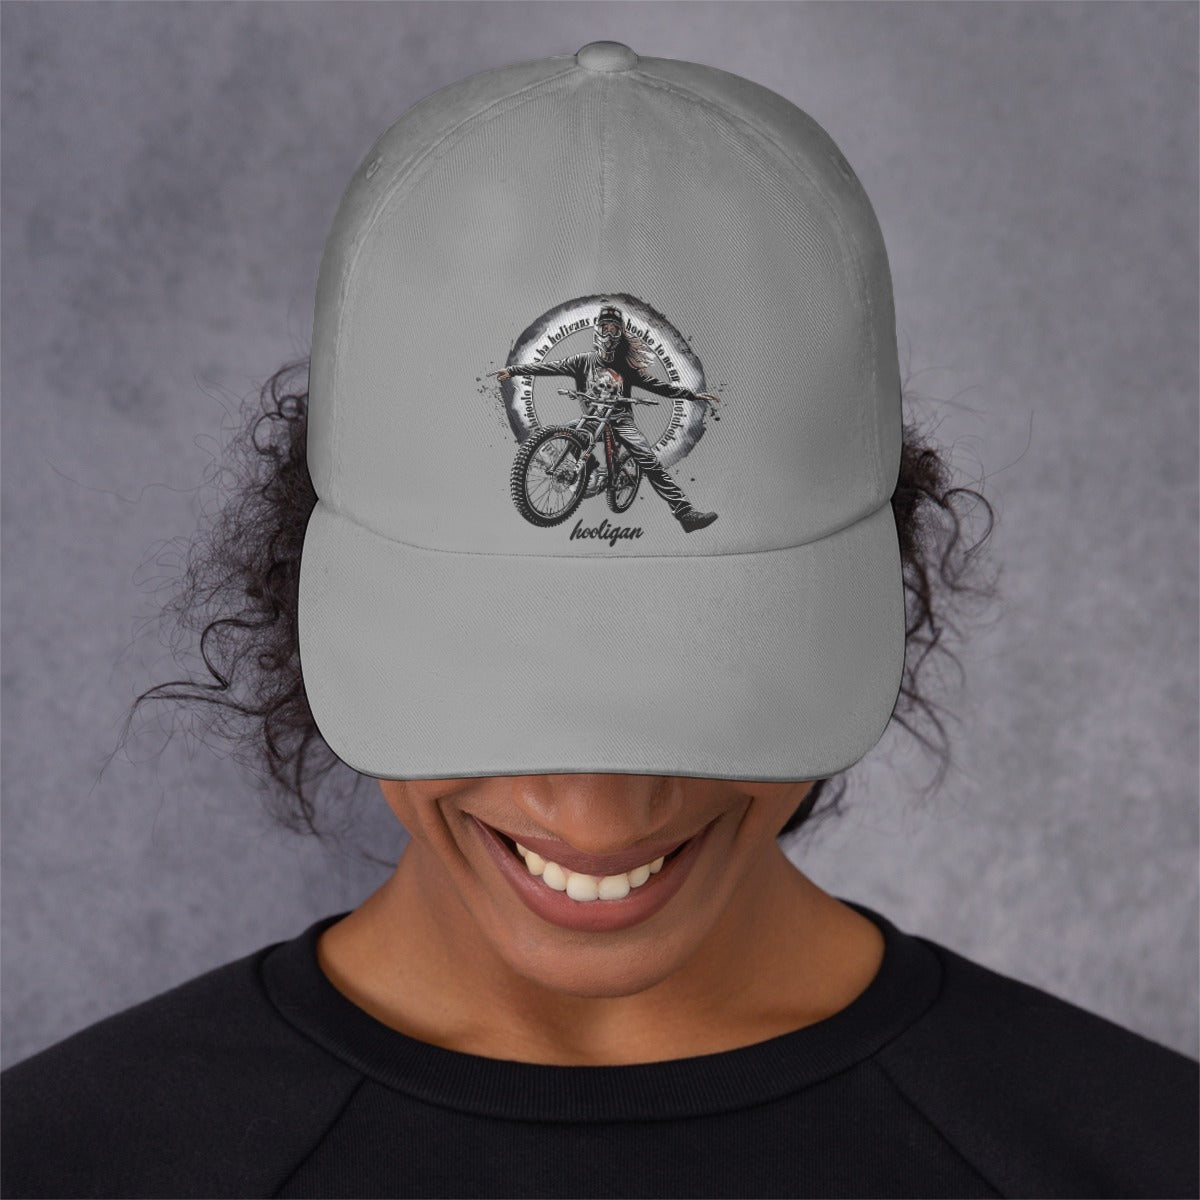 All-Over Print Peaked Cap With Box